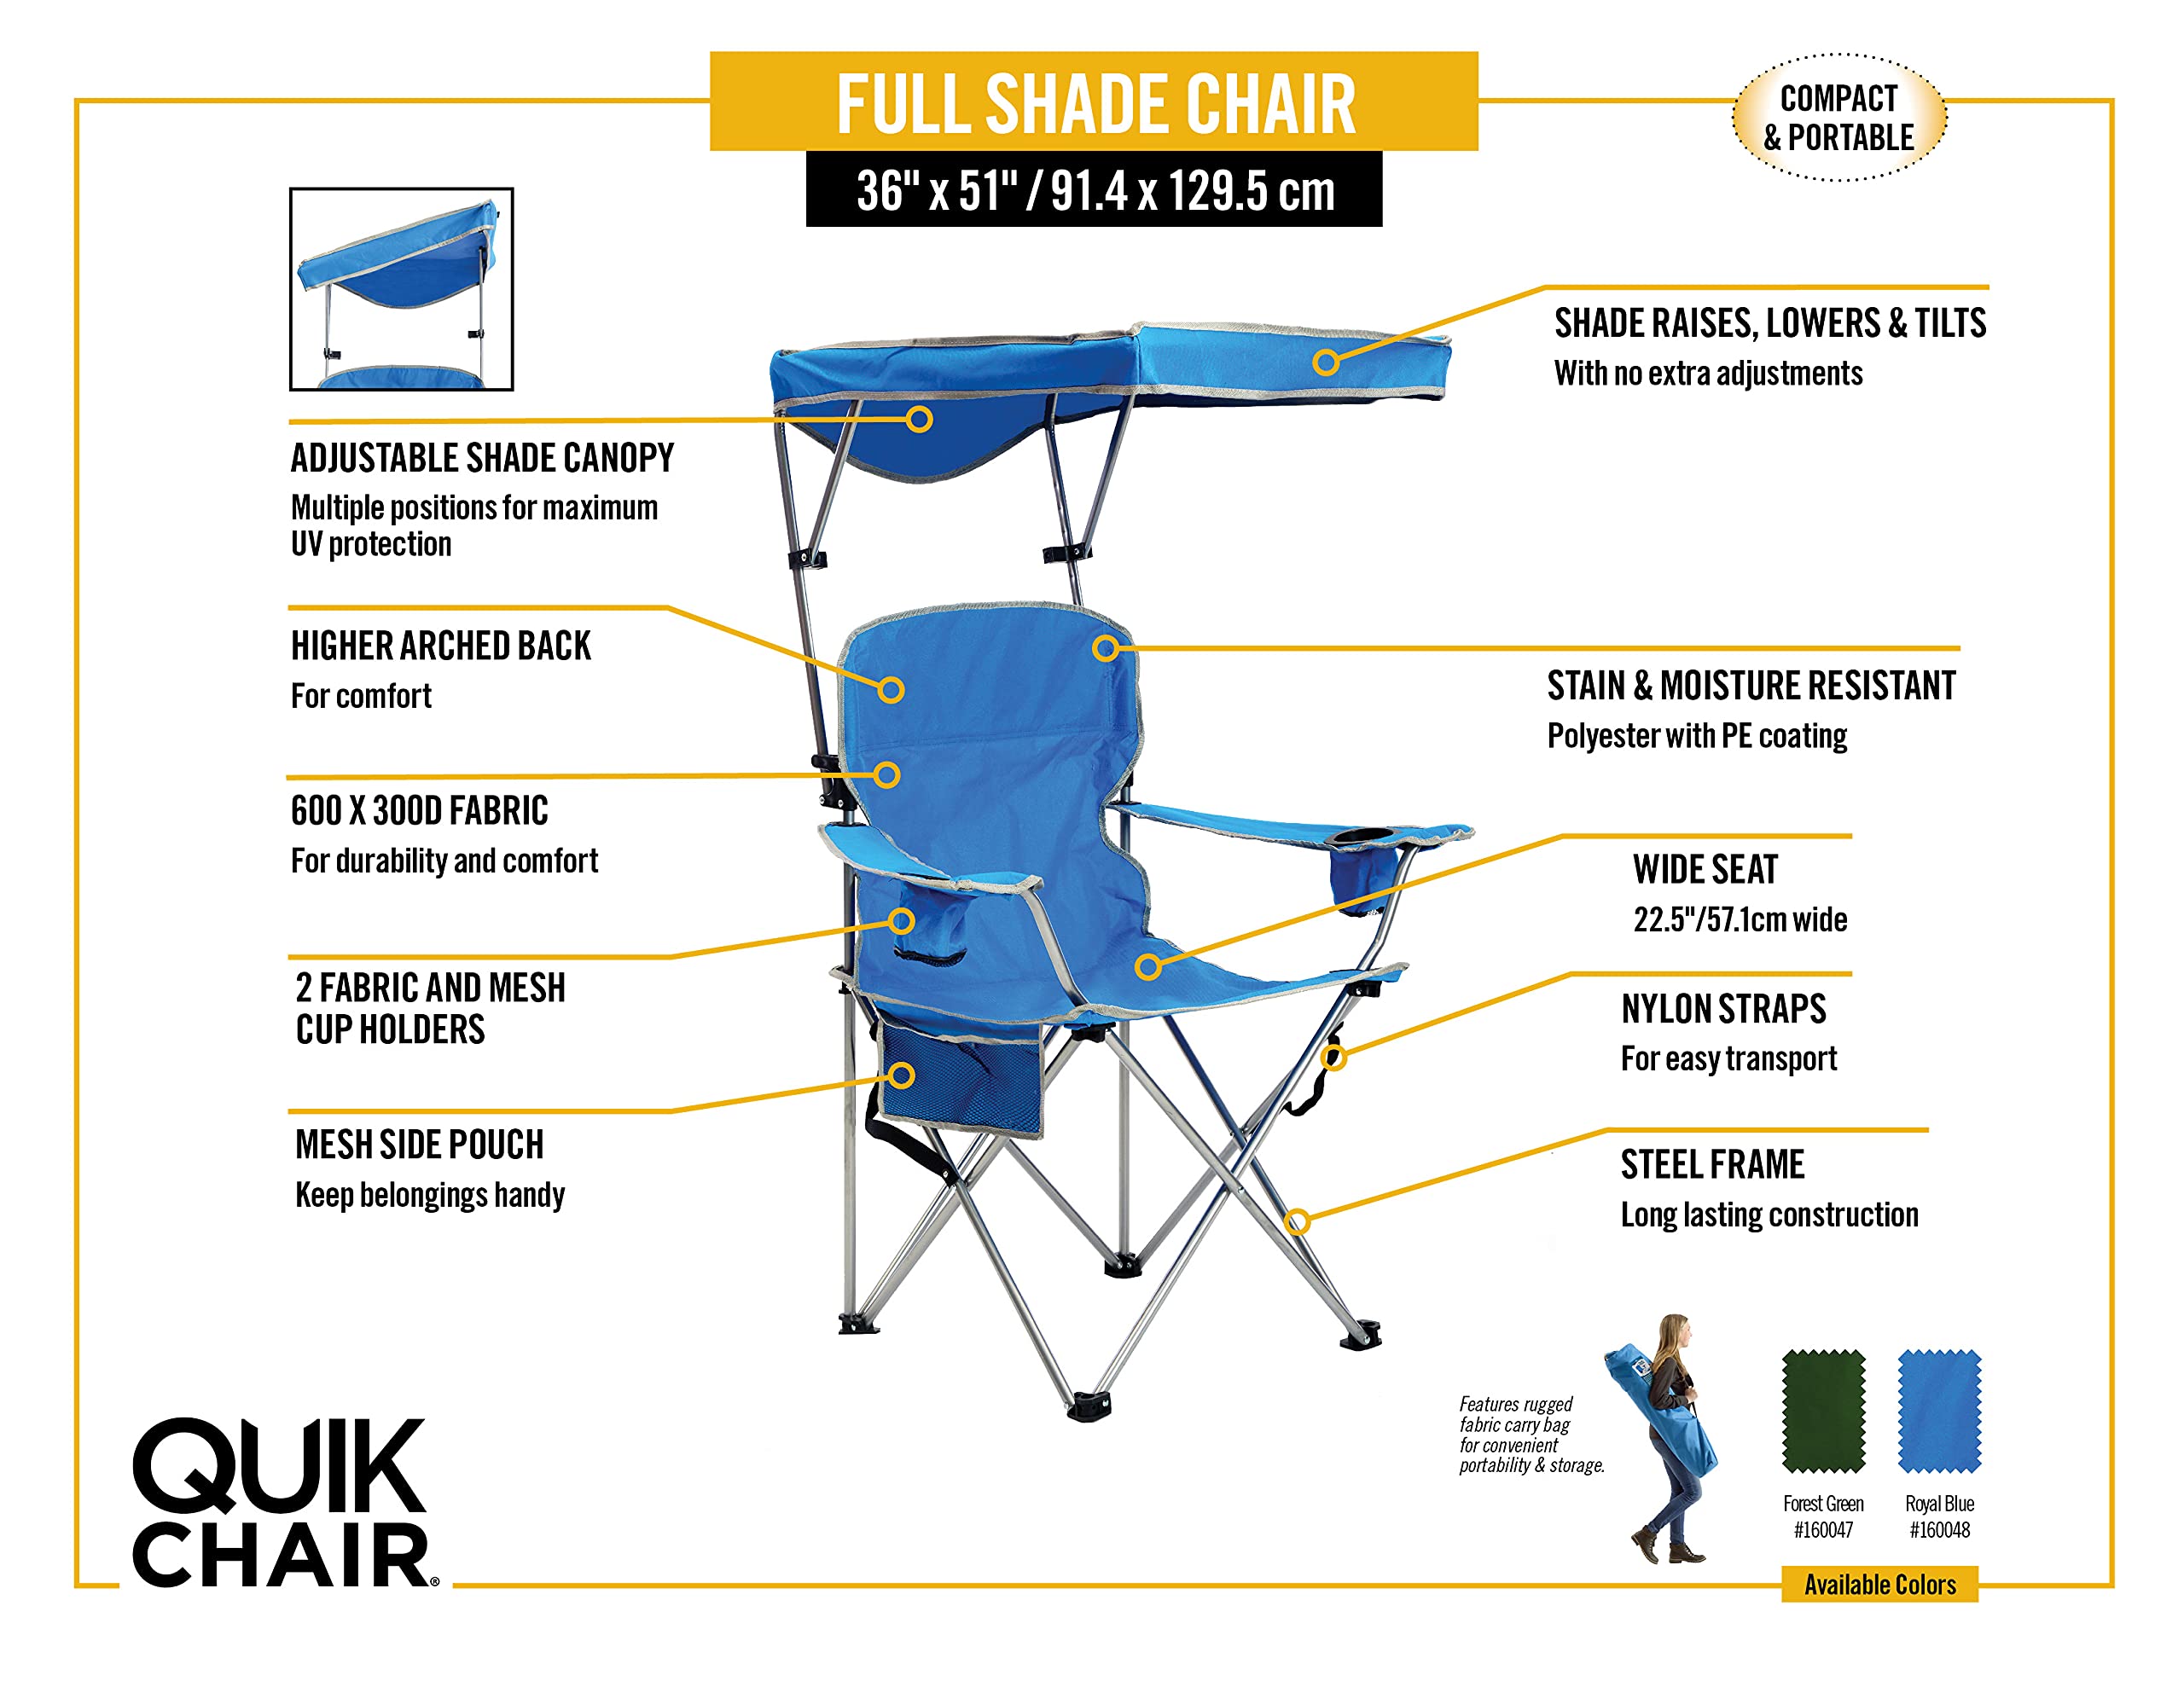 Quik Shade Full Size Shade Folding Chair for Camping, Polyester, Arm Rest|Foldable, Royal Blue, 2'L x 3'W x 4.3'H (160048DS)